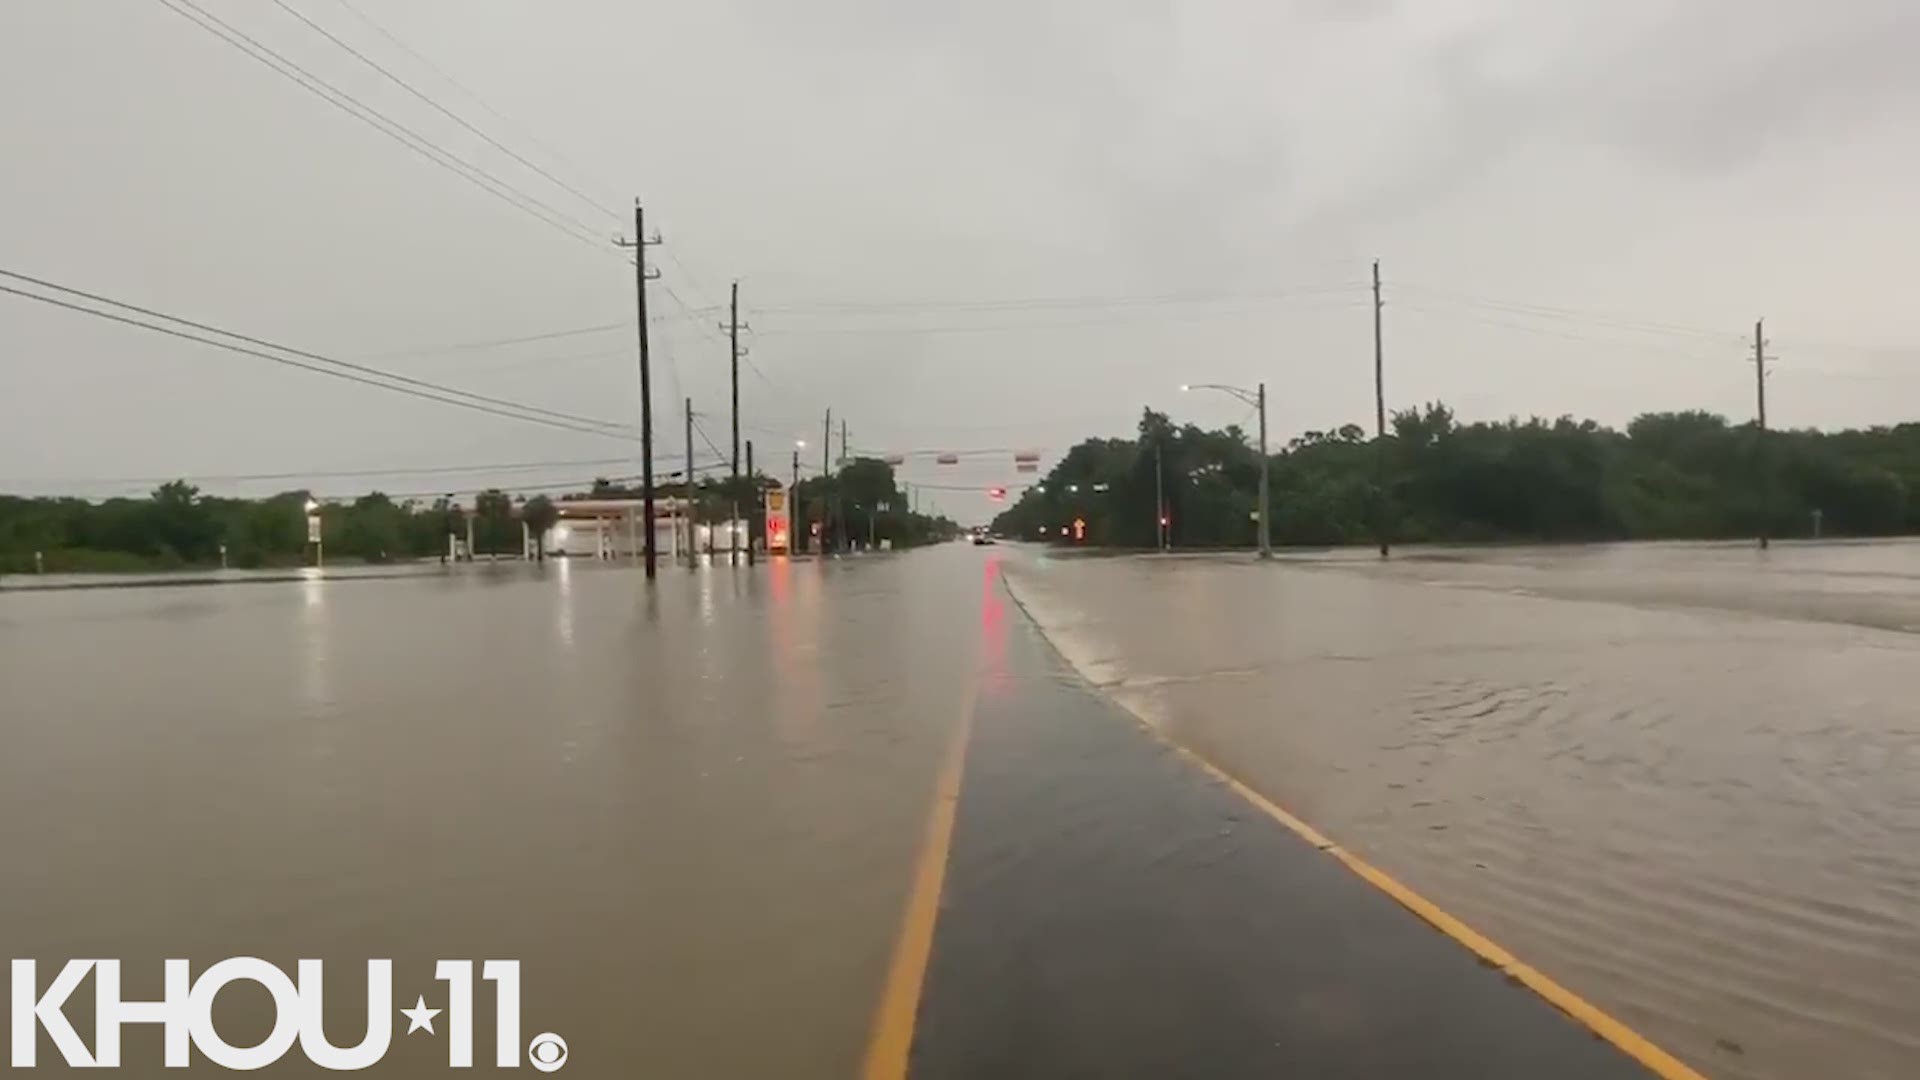 Harris County deputies said at least three people were stranded in their stalled cars after flash flooding in the Katy area.